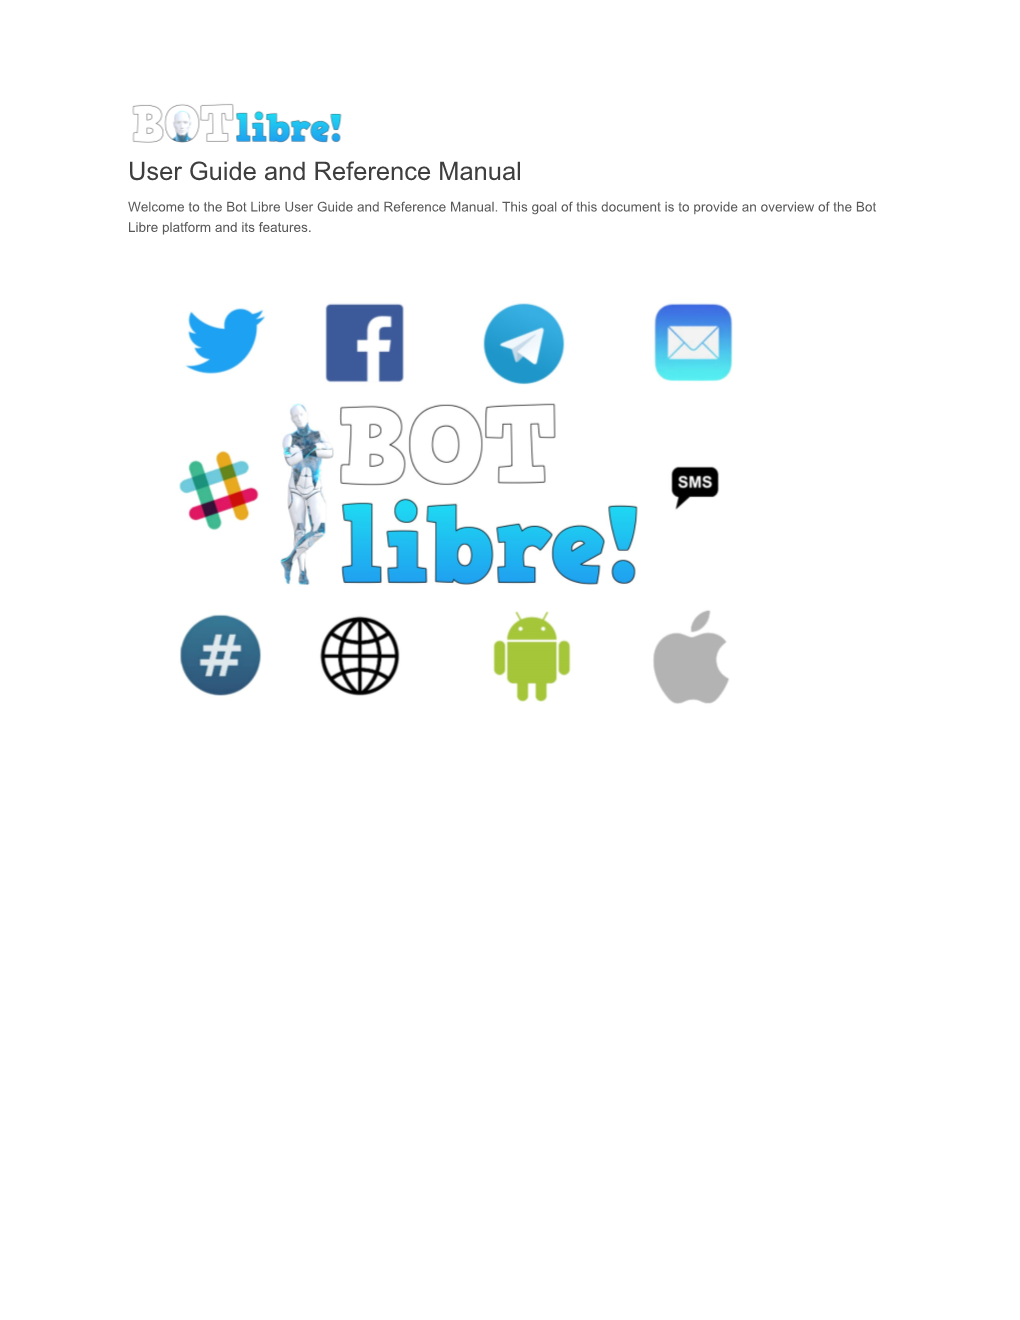 User Guide and Reference Manual (PDF)